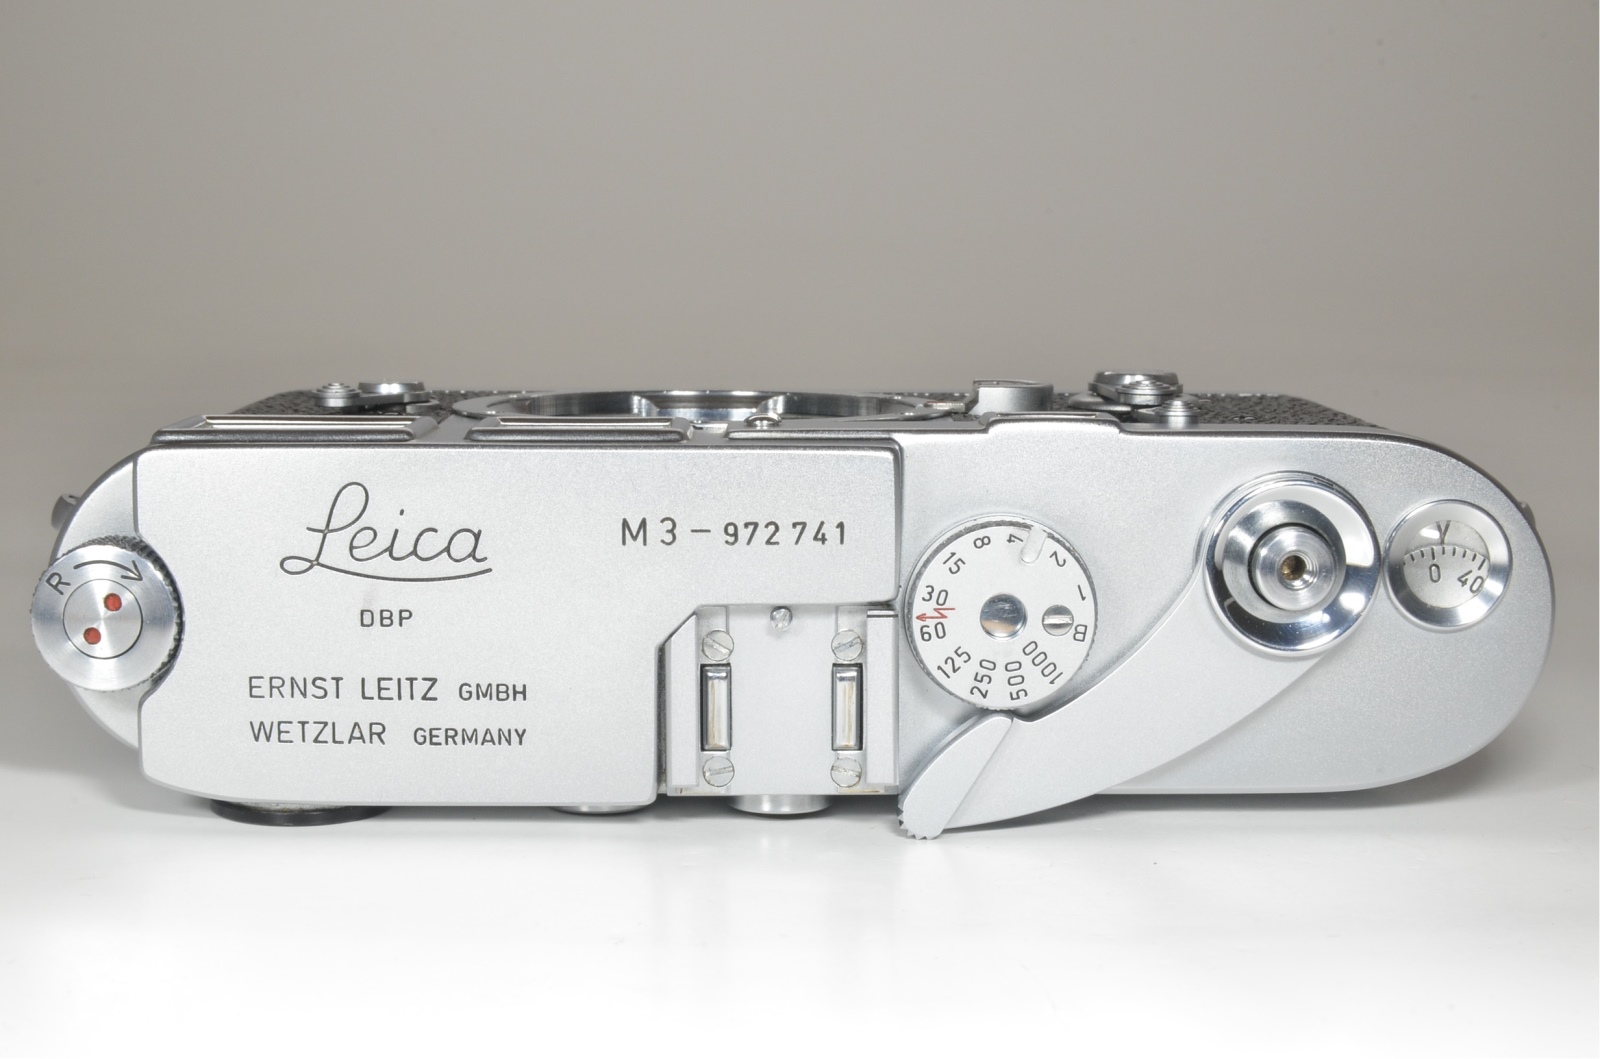 leica m3 single stroke s/n 972741 year 1959 with strap